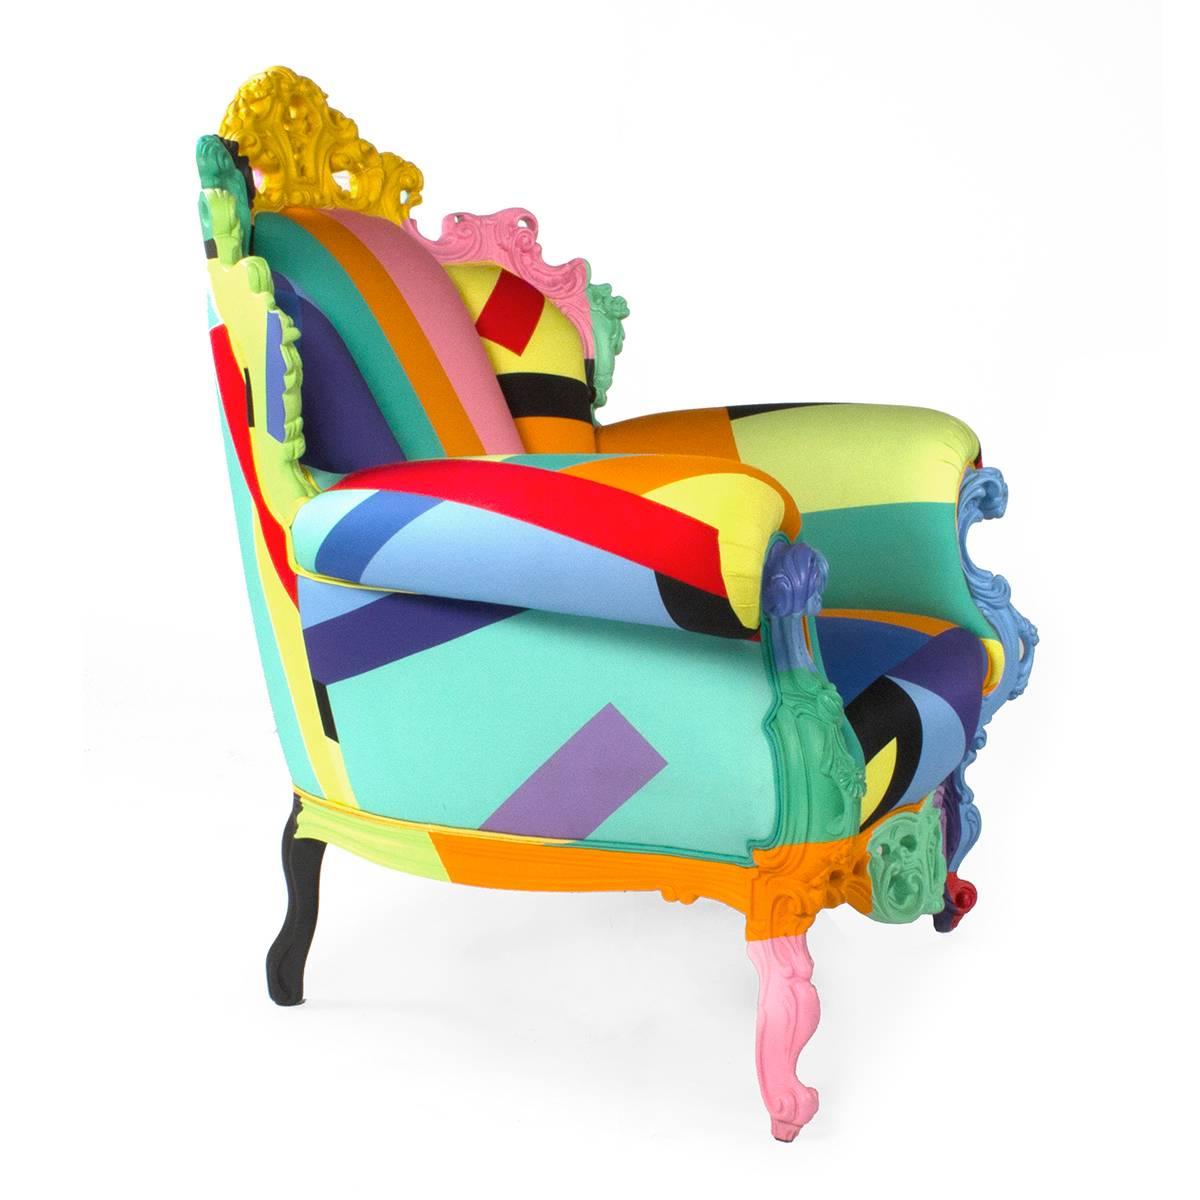 Armchair with wooden frame, upholstered with a new multi-color fabric designed by Alessandro Mendini. Created in 1978 for the Palazzo dei Diamanti in Ferrara, Proust was immediately recognized as an icon of 20th century design and revered as one of